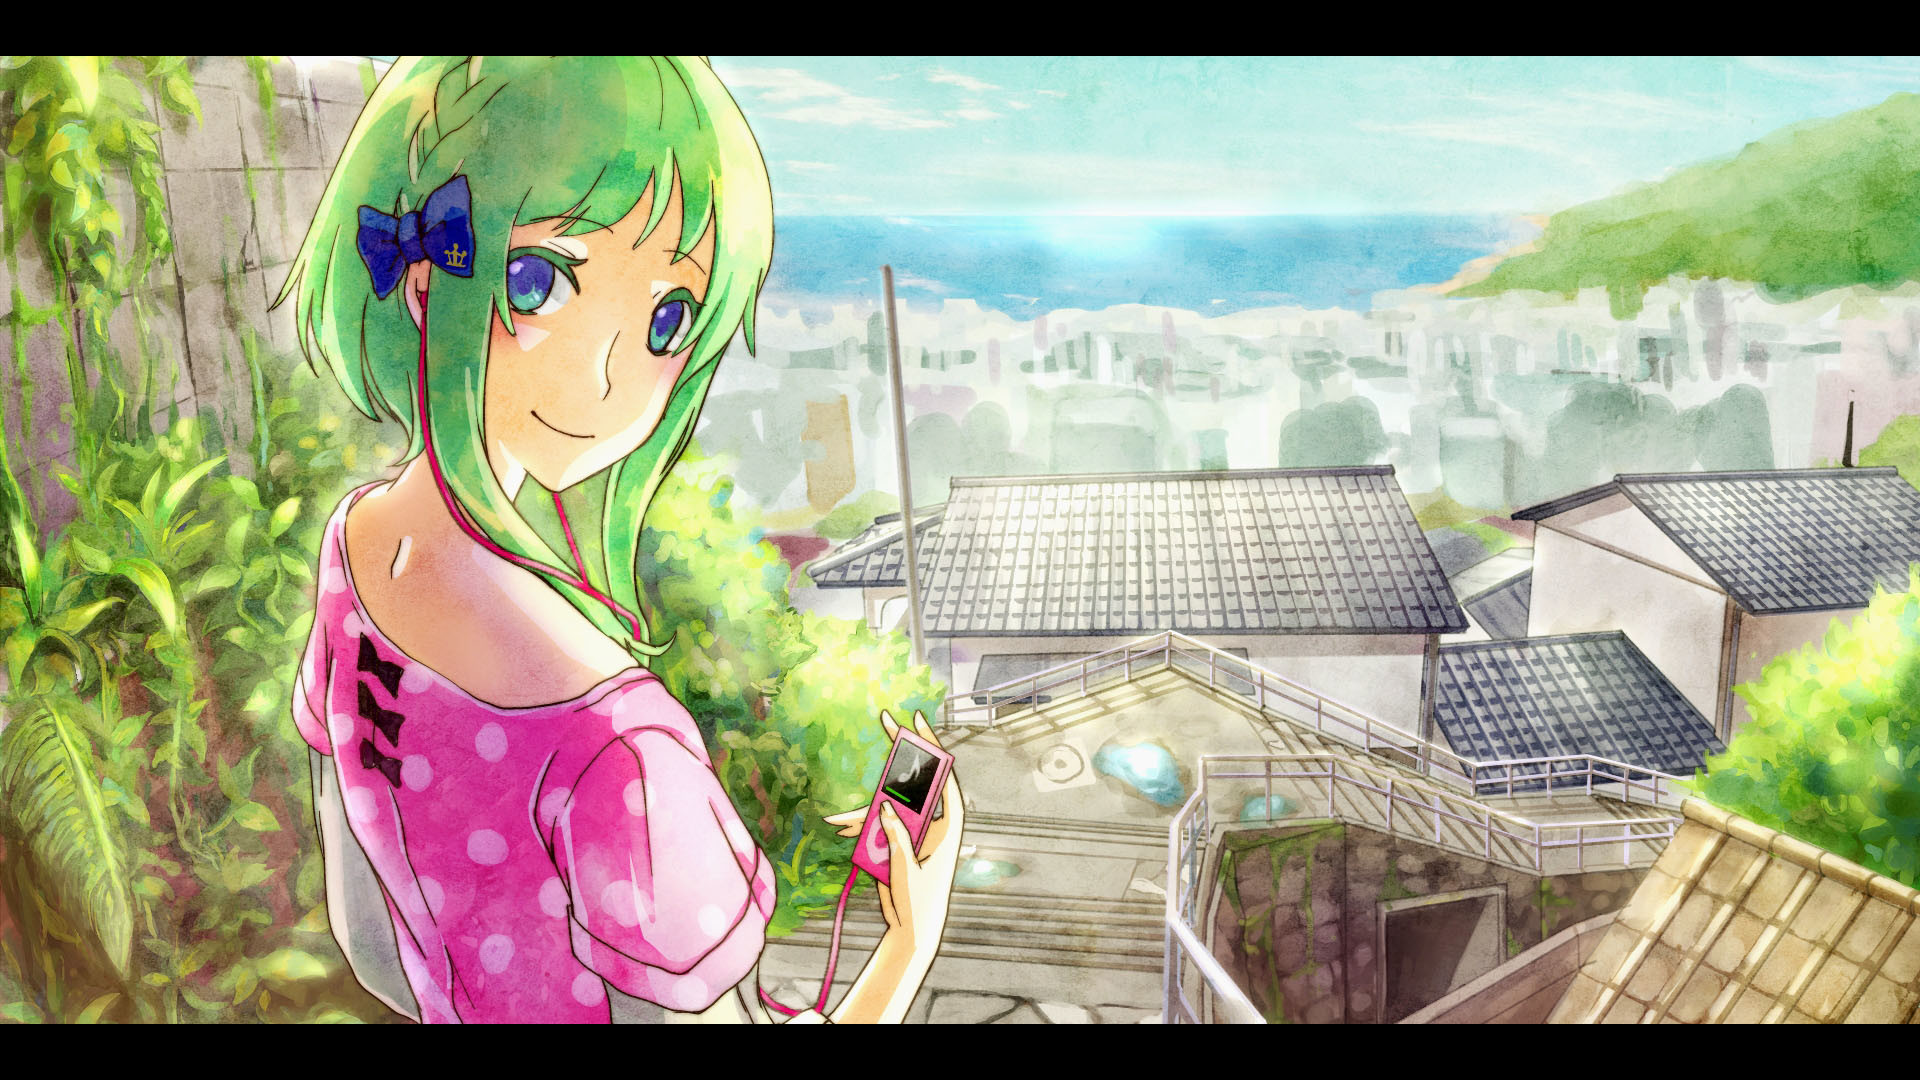 1920x1080 Tags: Anime, No.734, VOCALOID, GUMI, Peaceful, HD Wallpaper